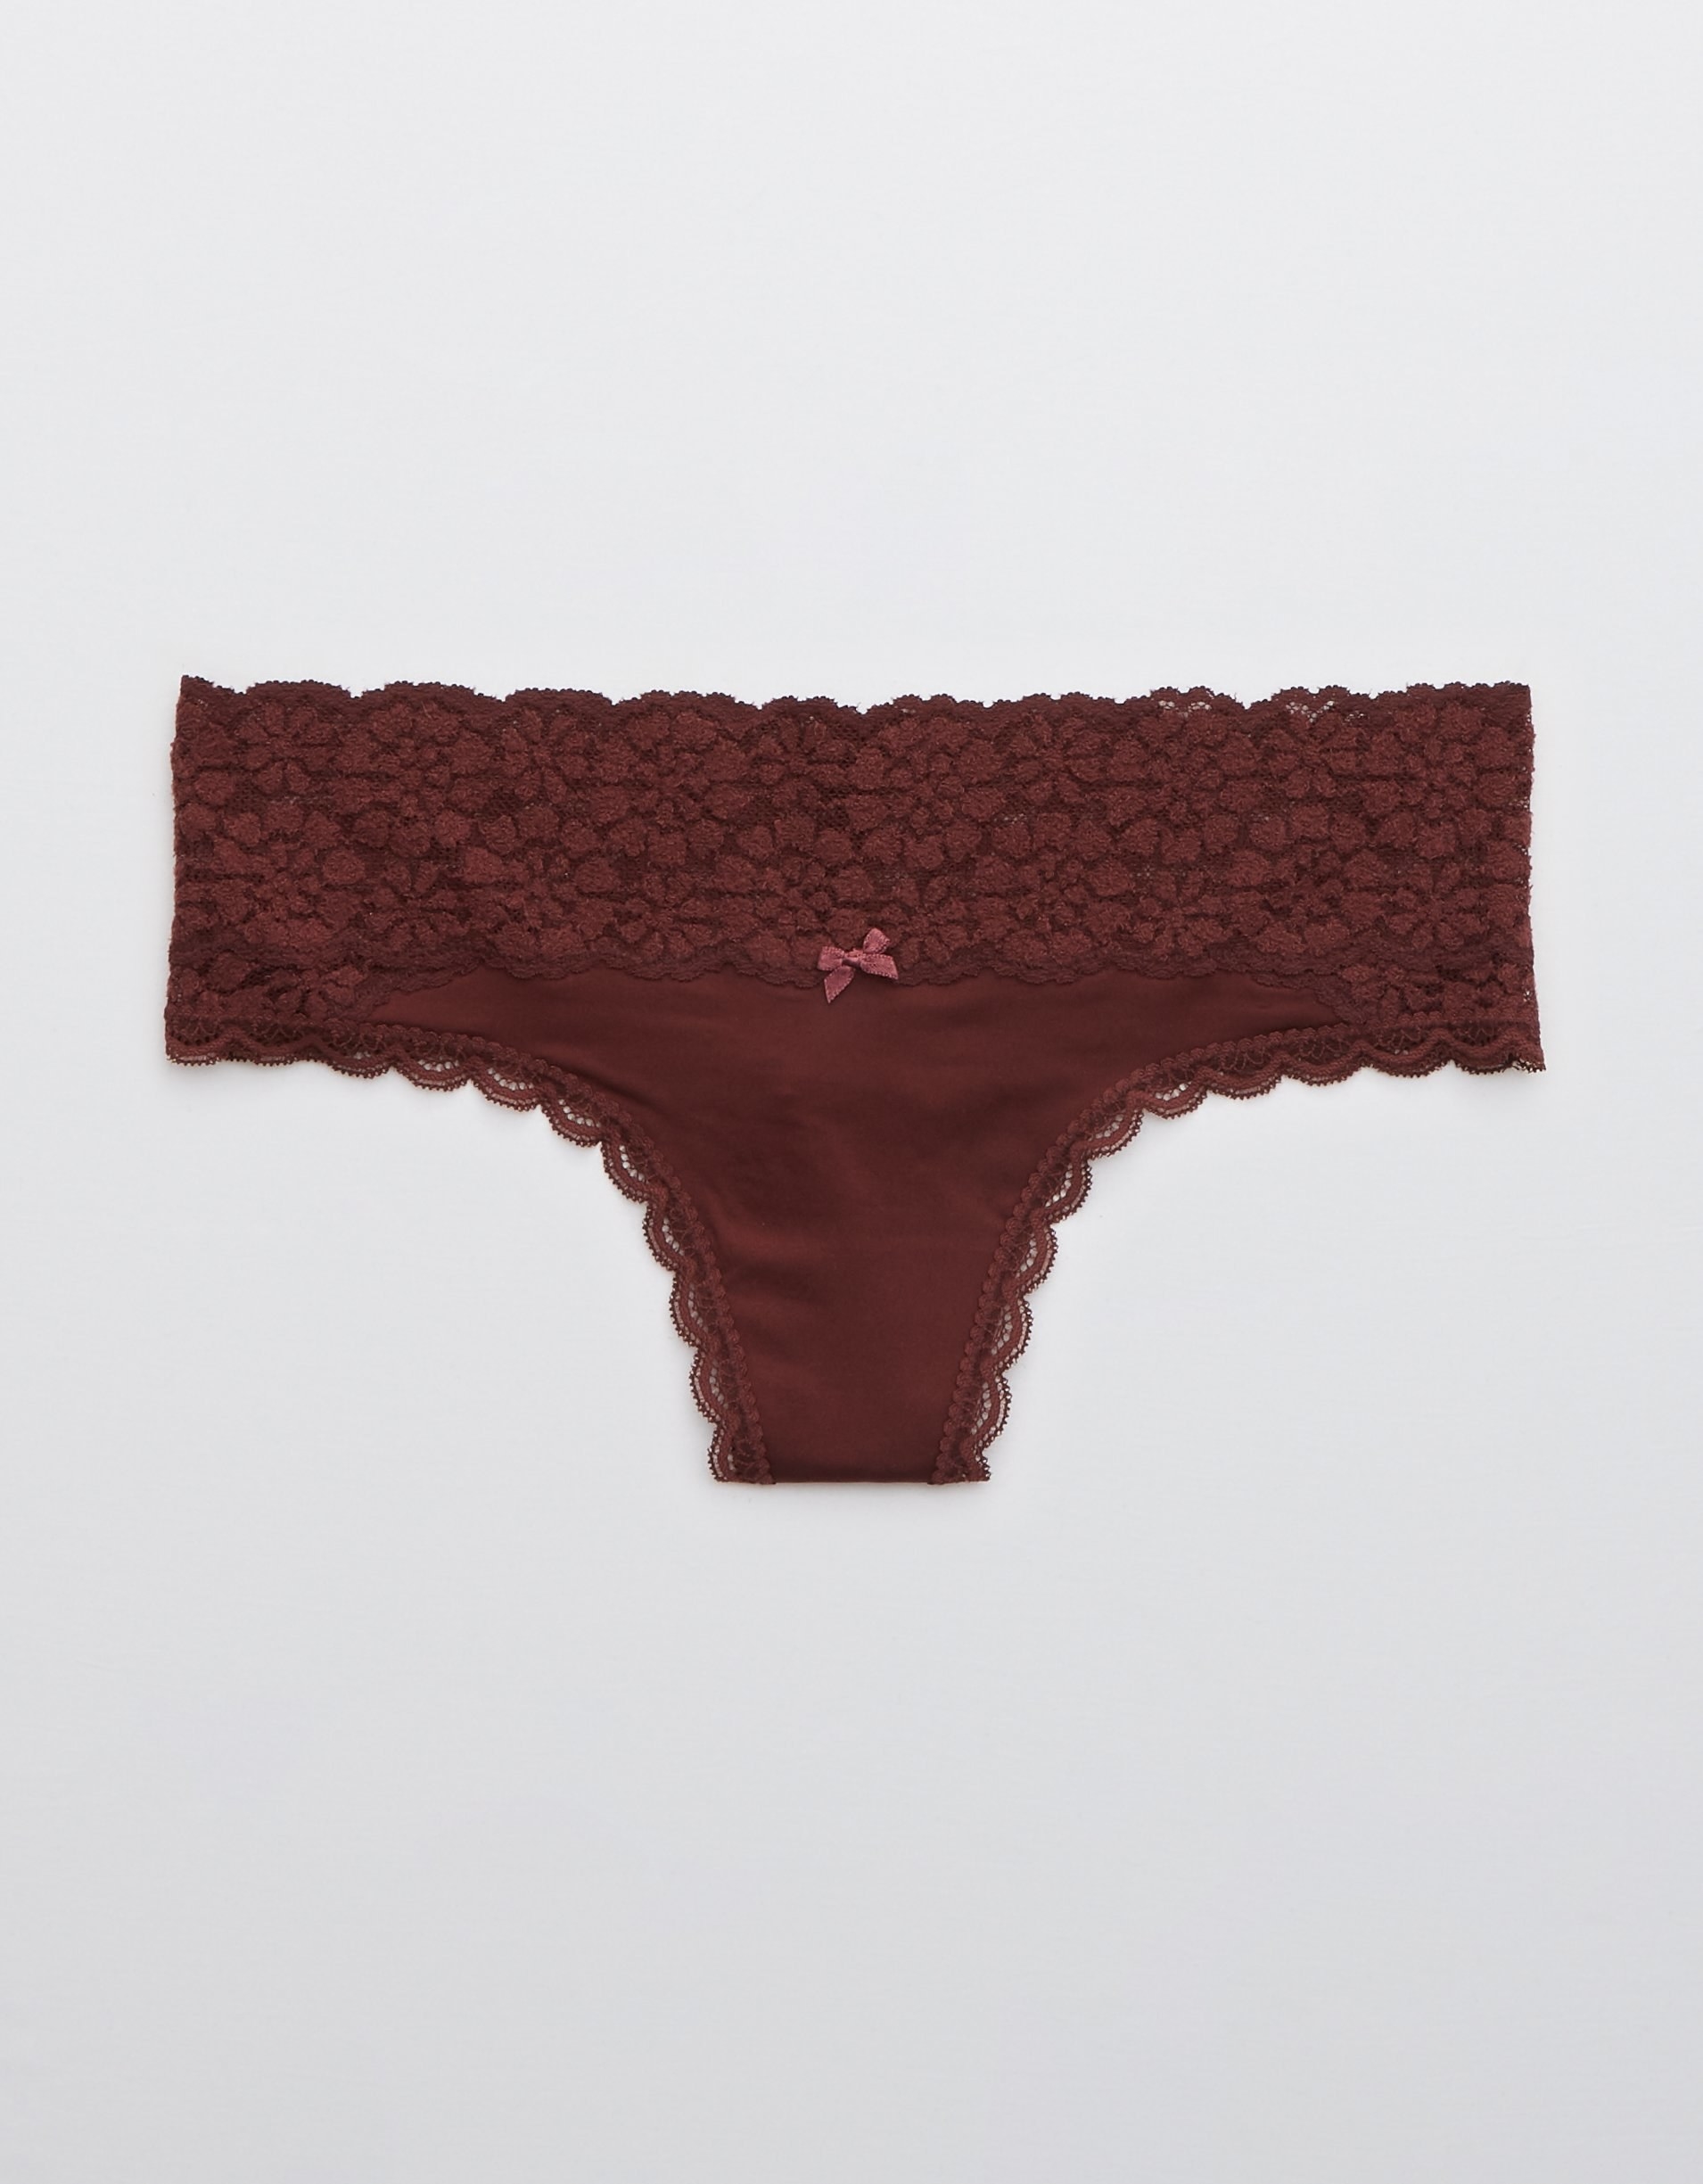 the Sugar Cookie Lace Shine Thong Underwear in royal berry